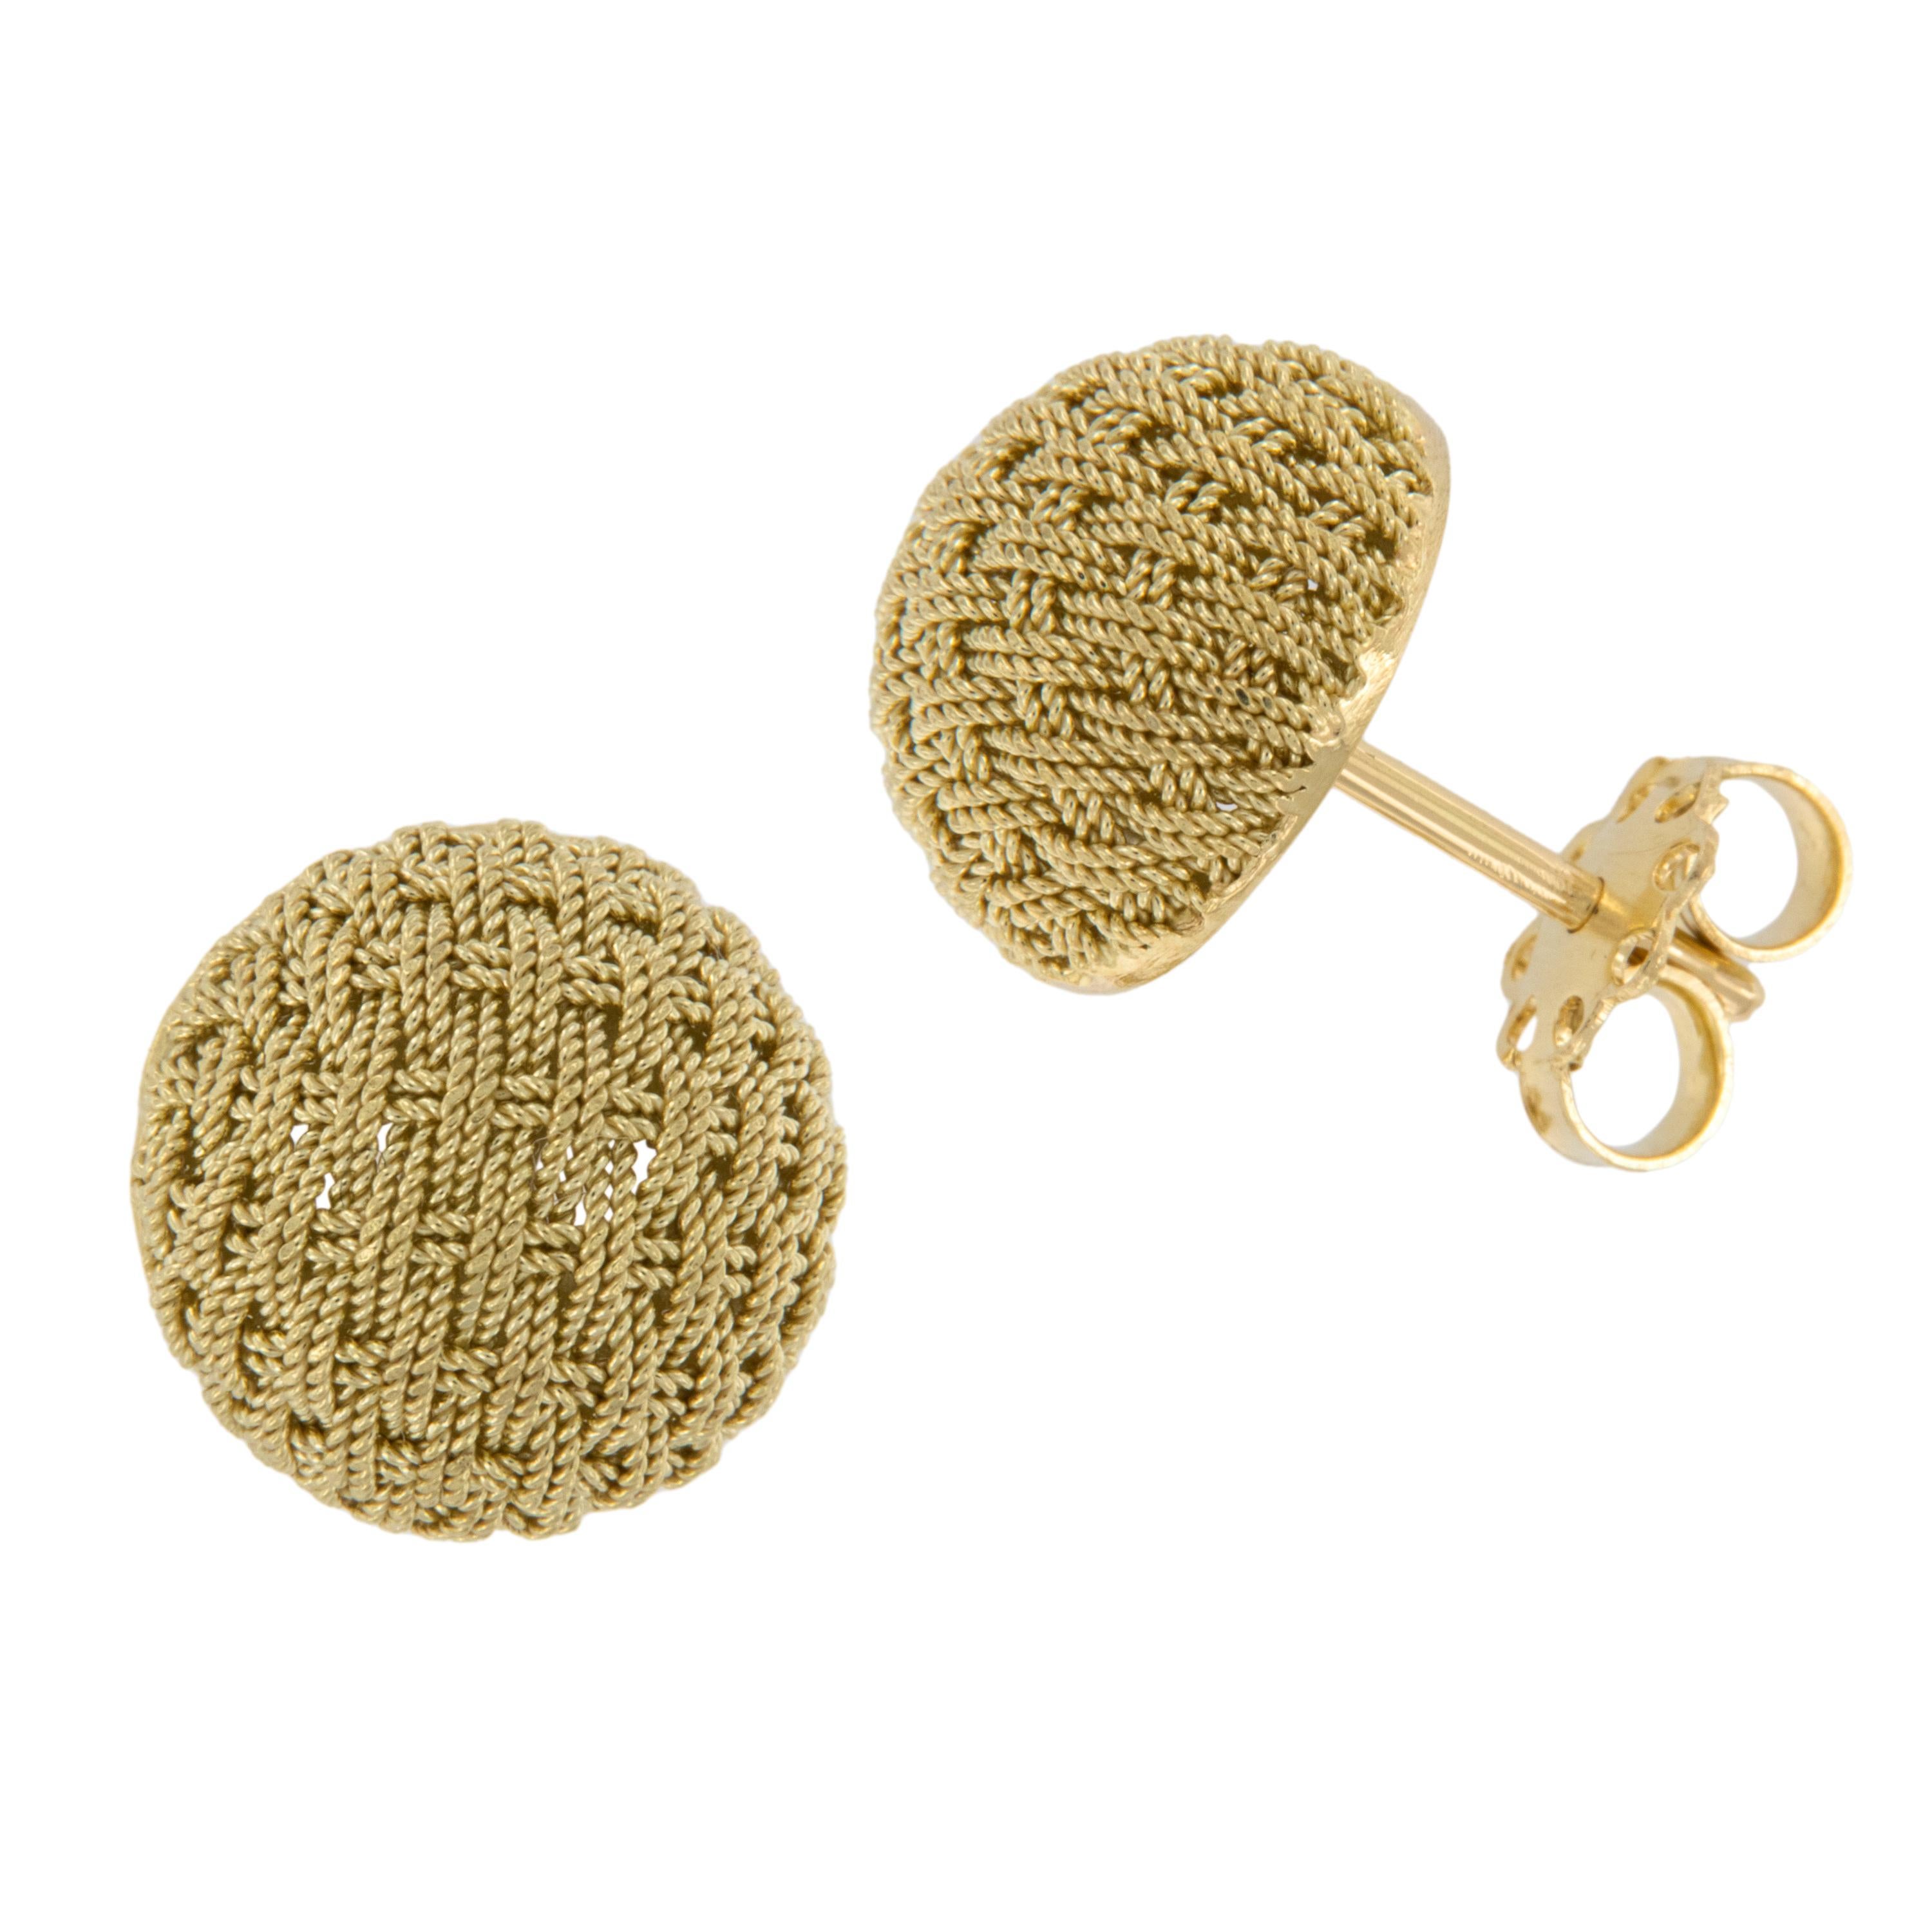 Byzantine Made in Italy 18 Karat Yellow Gold Basket Weave Button Stud Earrings